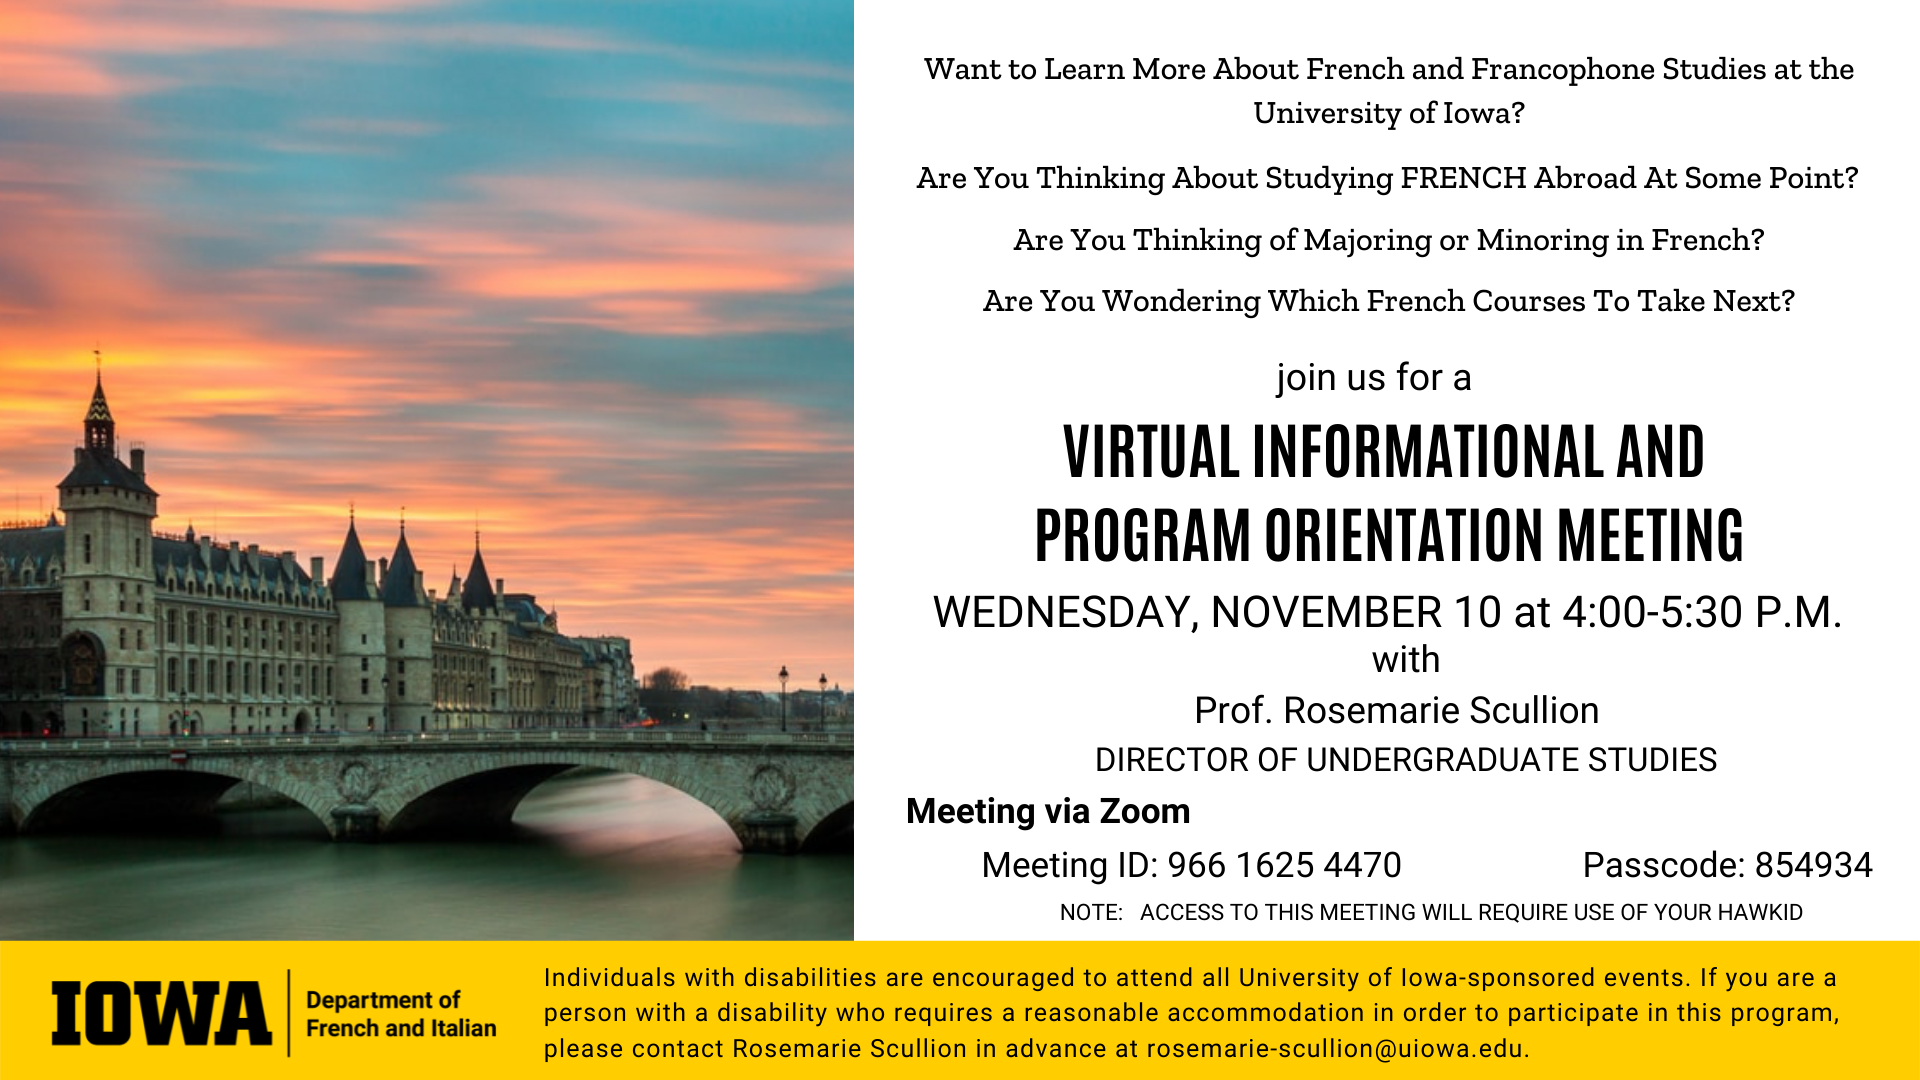 Want to Learn More About French and Francophone Studies at the University of Iowa? Are You Thinking About Studying FRENCH Abroad At Some Point? Are You Thinking of Majoring or Minoring in French? Are You Wondering Which French Courses To Take Next? Join us for a VIRTUAL INFORMATIONAL AND  PROGRAM ORIENTATION MEETING on WEDNESDAY, NOVEMBER 10 at 4-5:30 P.M. with Prof. Rosemarie Scullion   DIRECTOR OF UNDERGRADUATE STUDIES. Meeting via Zoom. Meeting ID 966 1625 4470. Passcode 854934. Note that access to this meeting will require use of your HawkID. Individuals with disabilities are encouraged to attend all University of Iowa-sponsored events. If you are a person with a disability who requires a reasonable accommodation in order to participate in this program, please contact Rosemarie Scullion in advance at rosemarie-scullion@uiowa.edu.